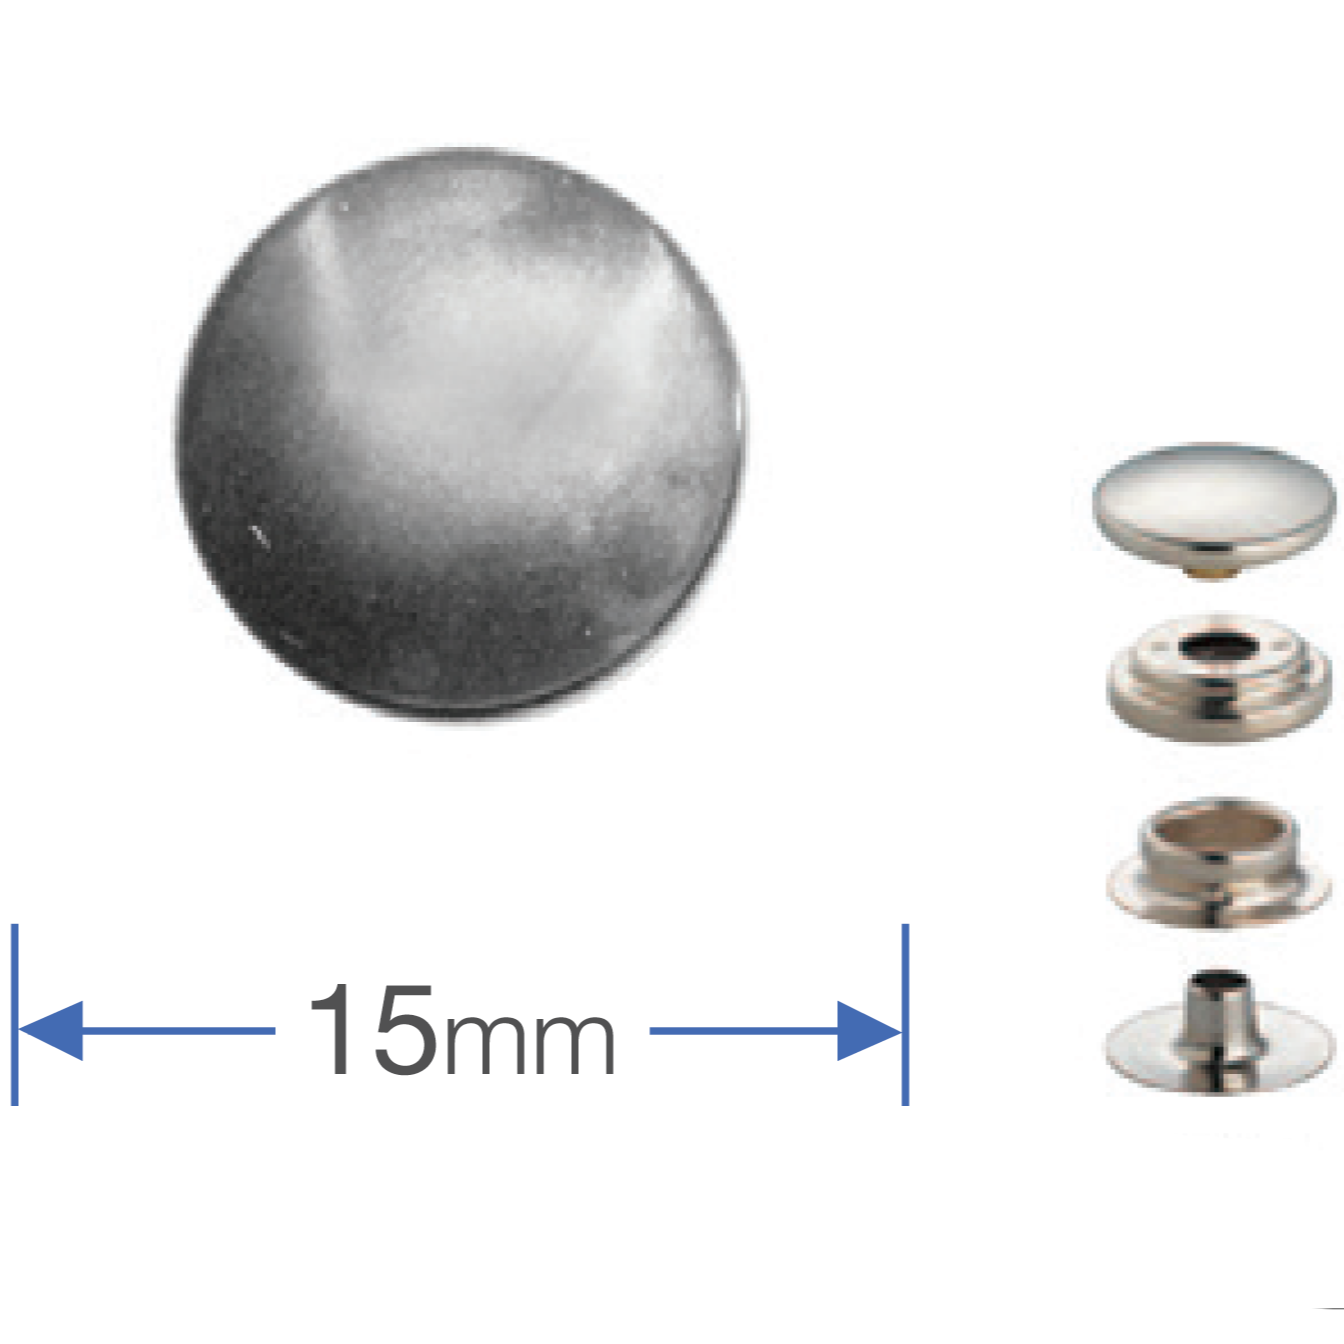 Dimensions of 390241 Silver Press Studs Silver 15mm: PACK OF 100 from Jaycotts Sewing Supplies